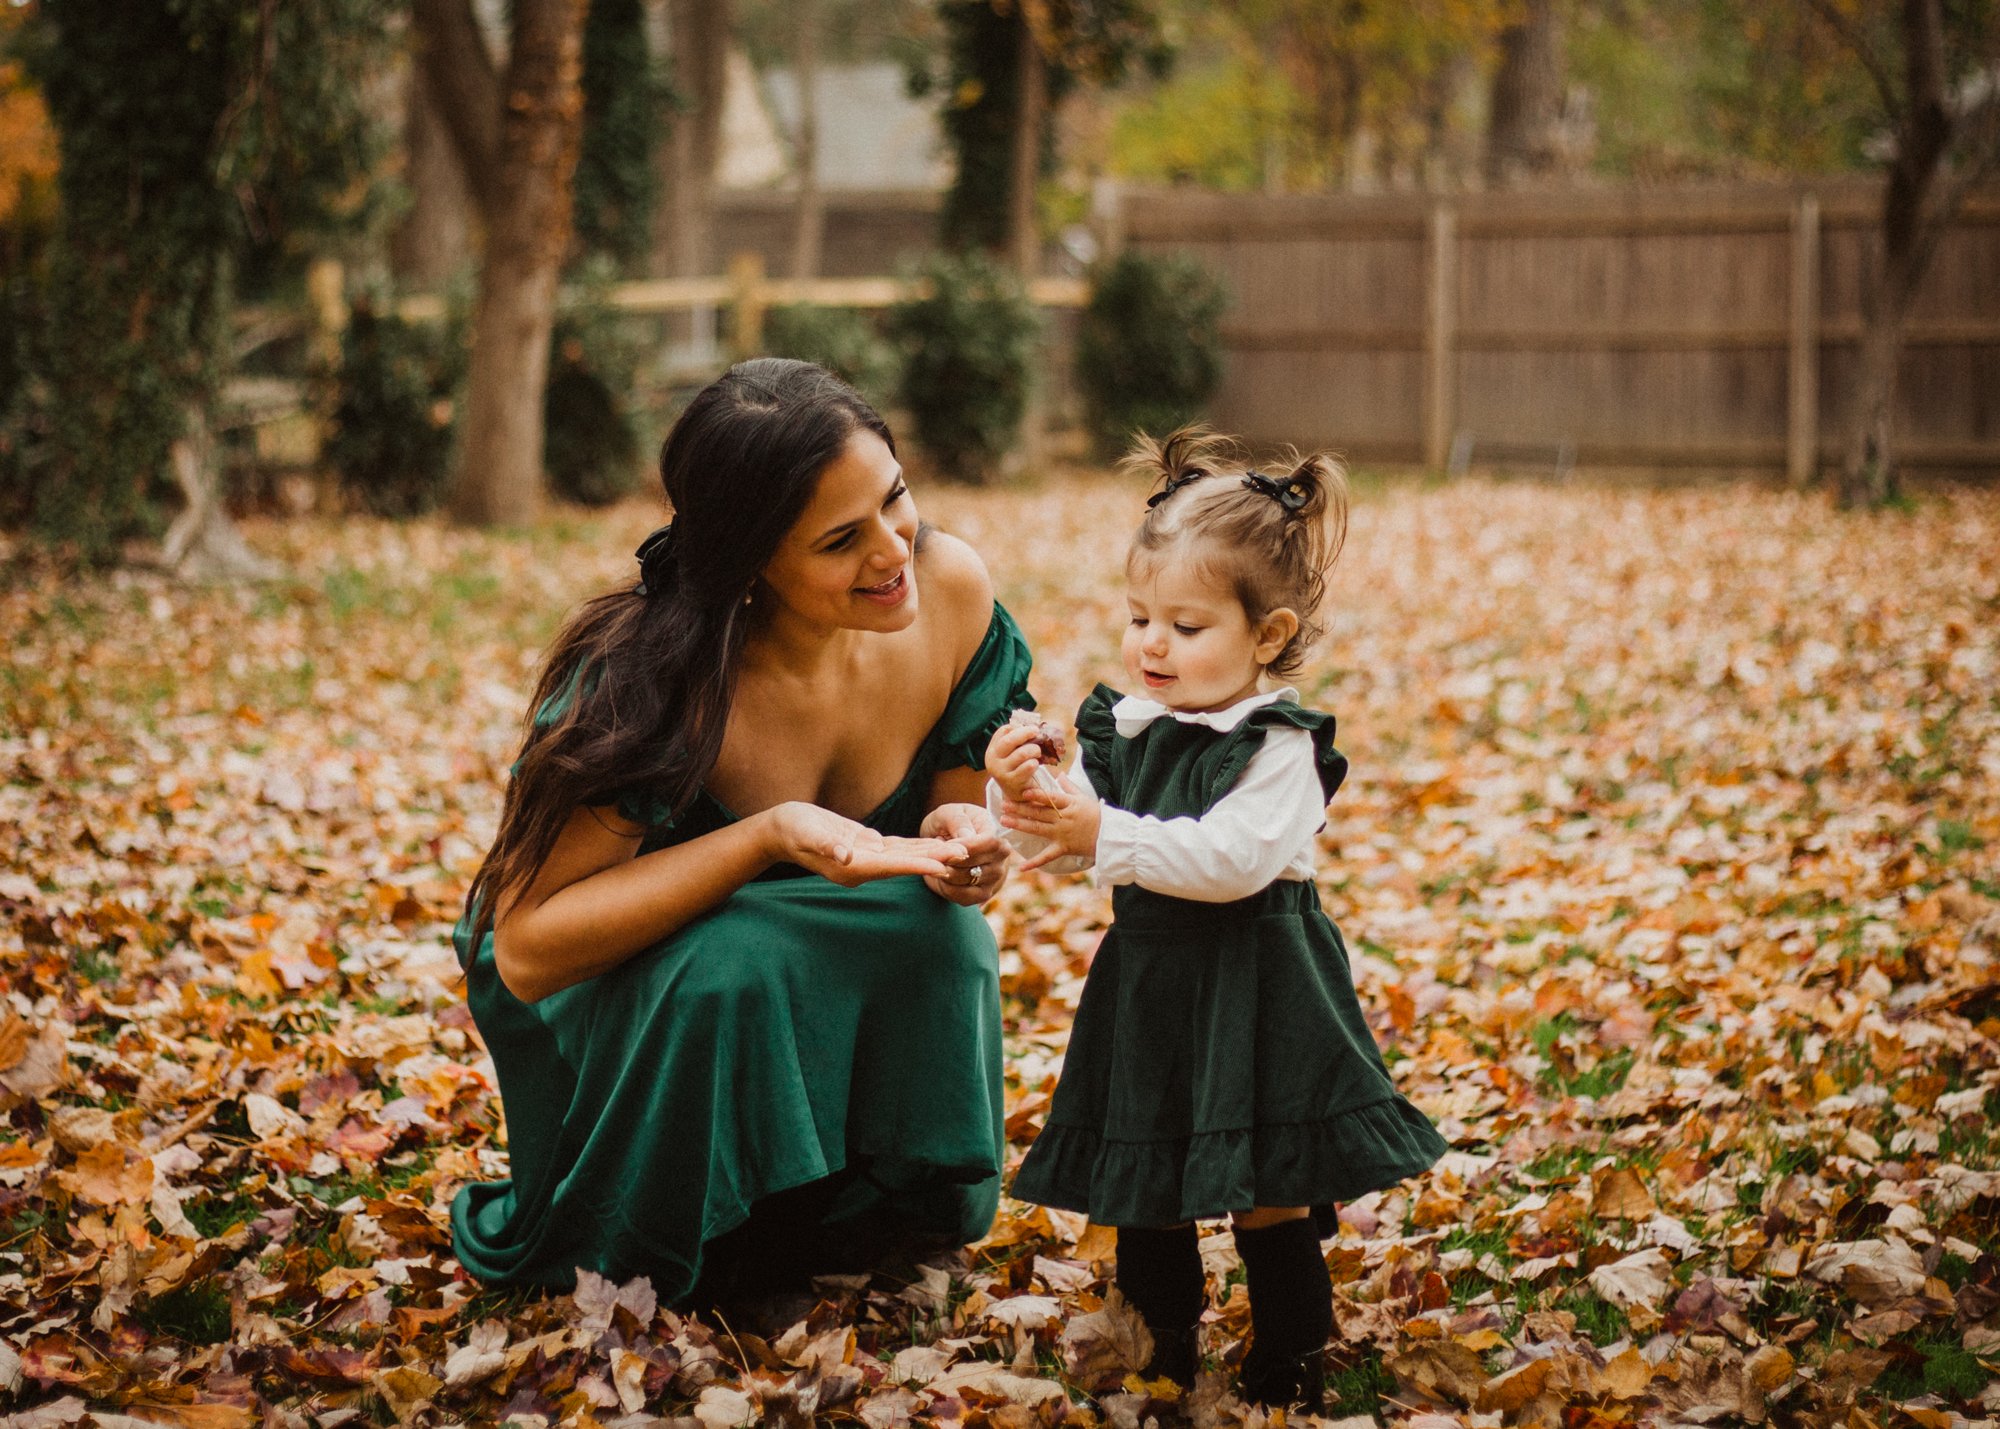 Mother and young daughter in matching green outfits, crouched in fallen autumn leaves.